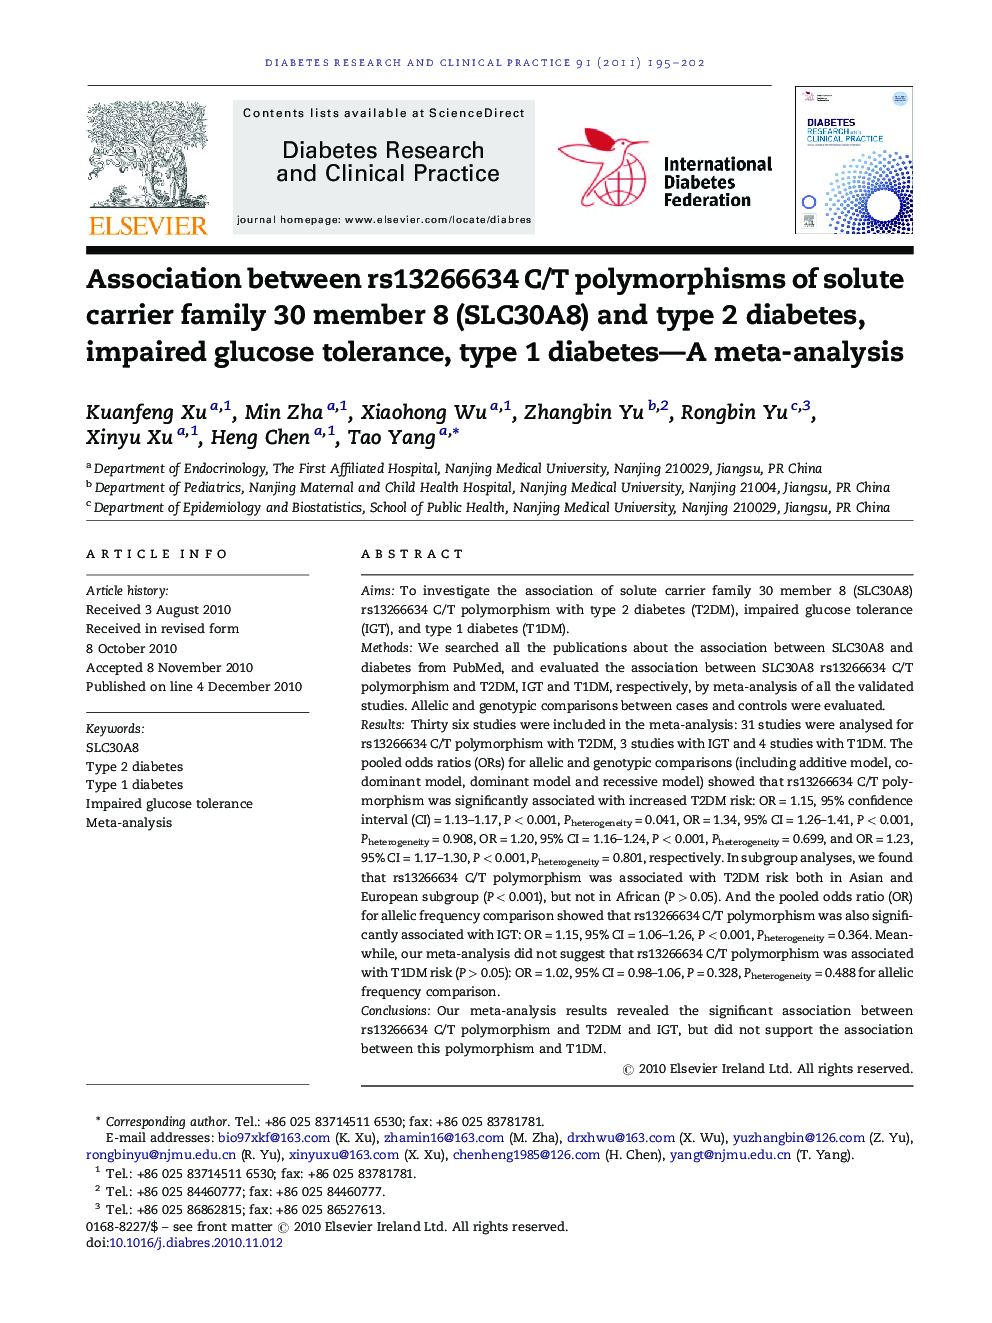 Association between rs13266634 C/T polymorphisms of solute carrier family 30 member 8 (SLC30A8) and type 2 diabetes, impaired glucose tolerance, type 1 diabetes—A meta-analysis